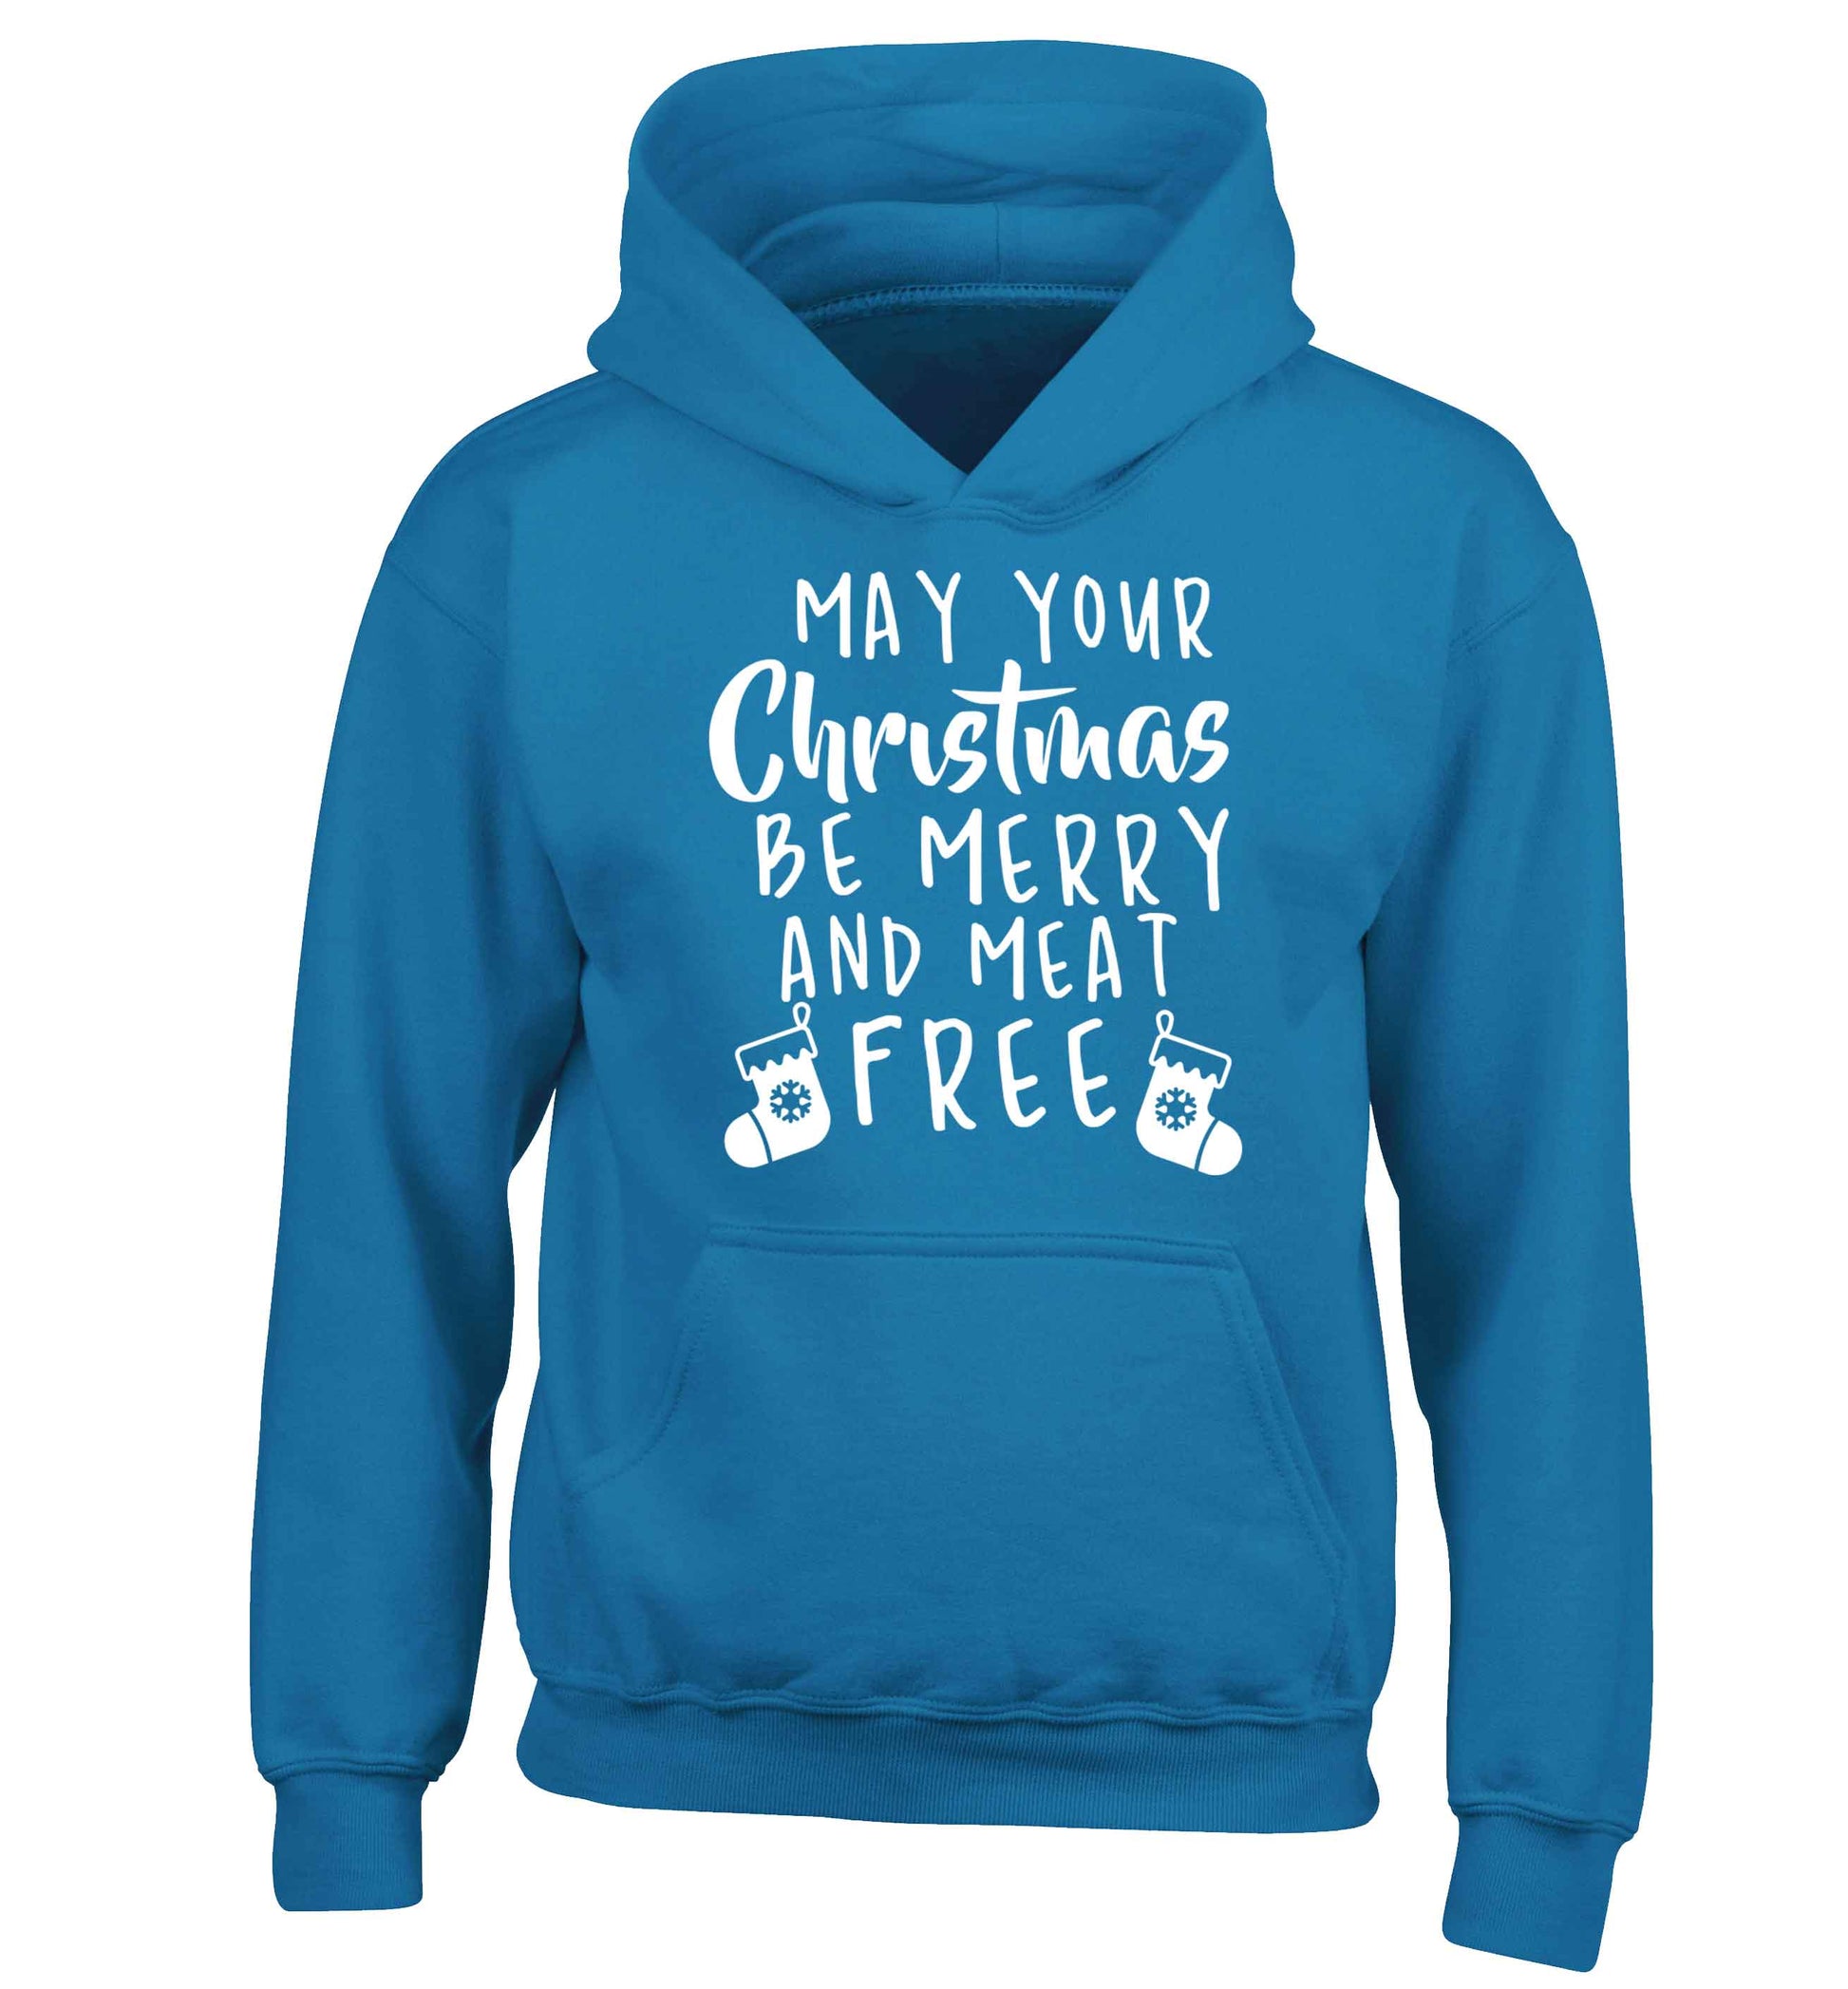 May your Christmas be merry and meat free children's blue hoodie 12-13 Years